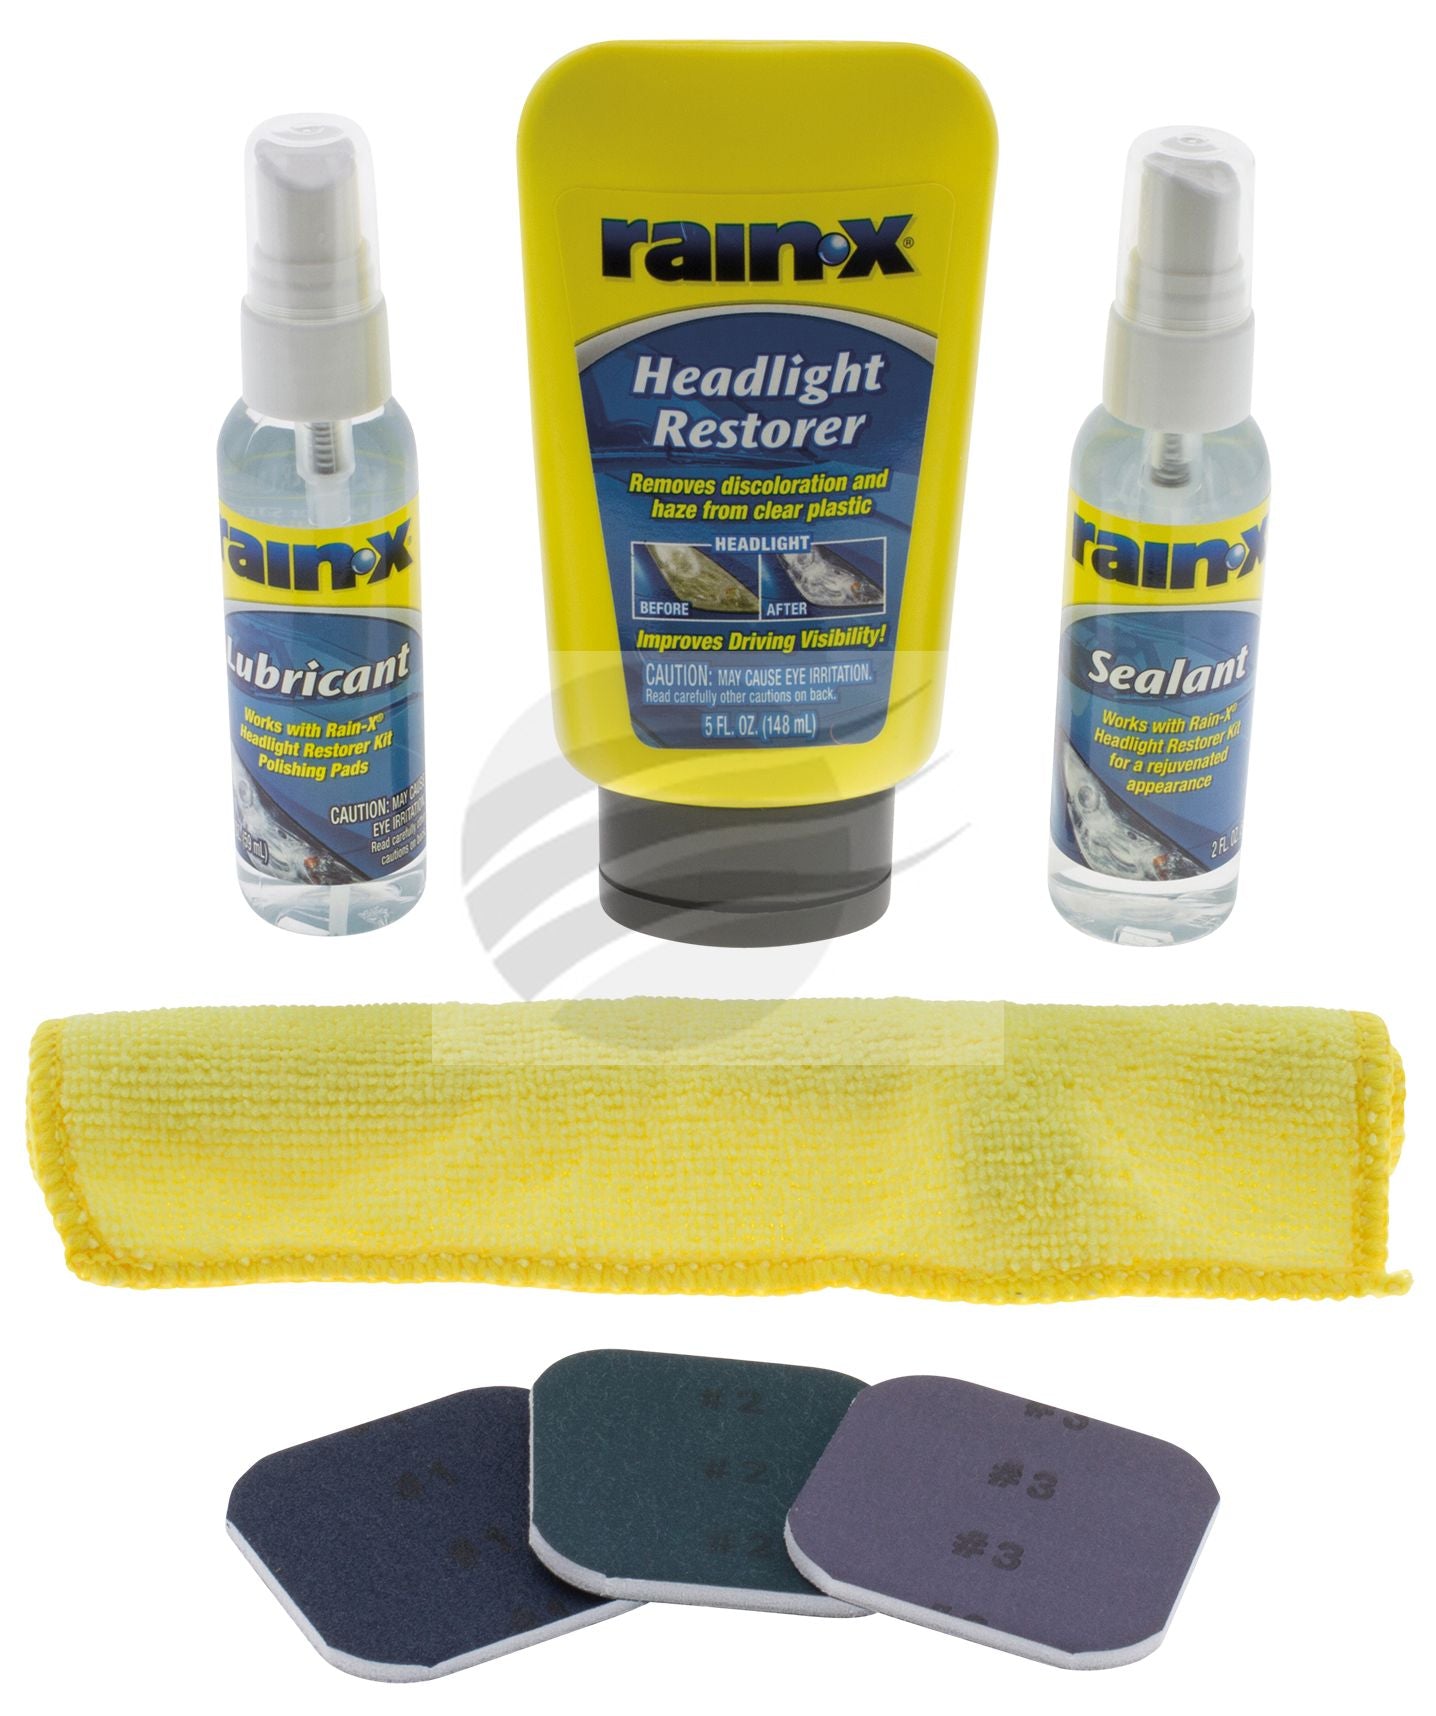 Our products - Rain-X